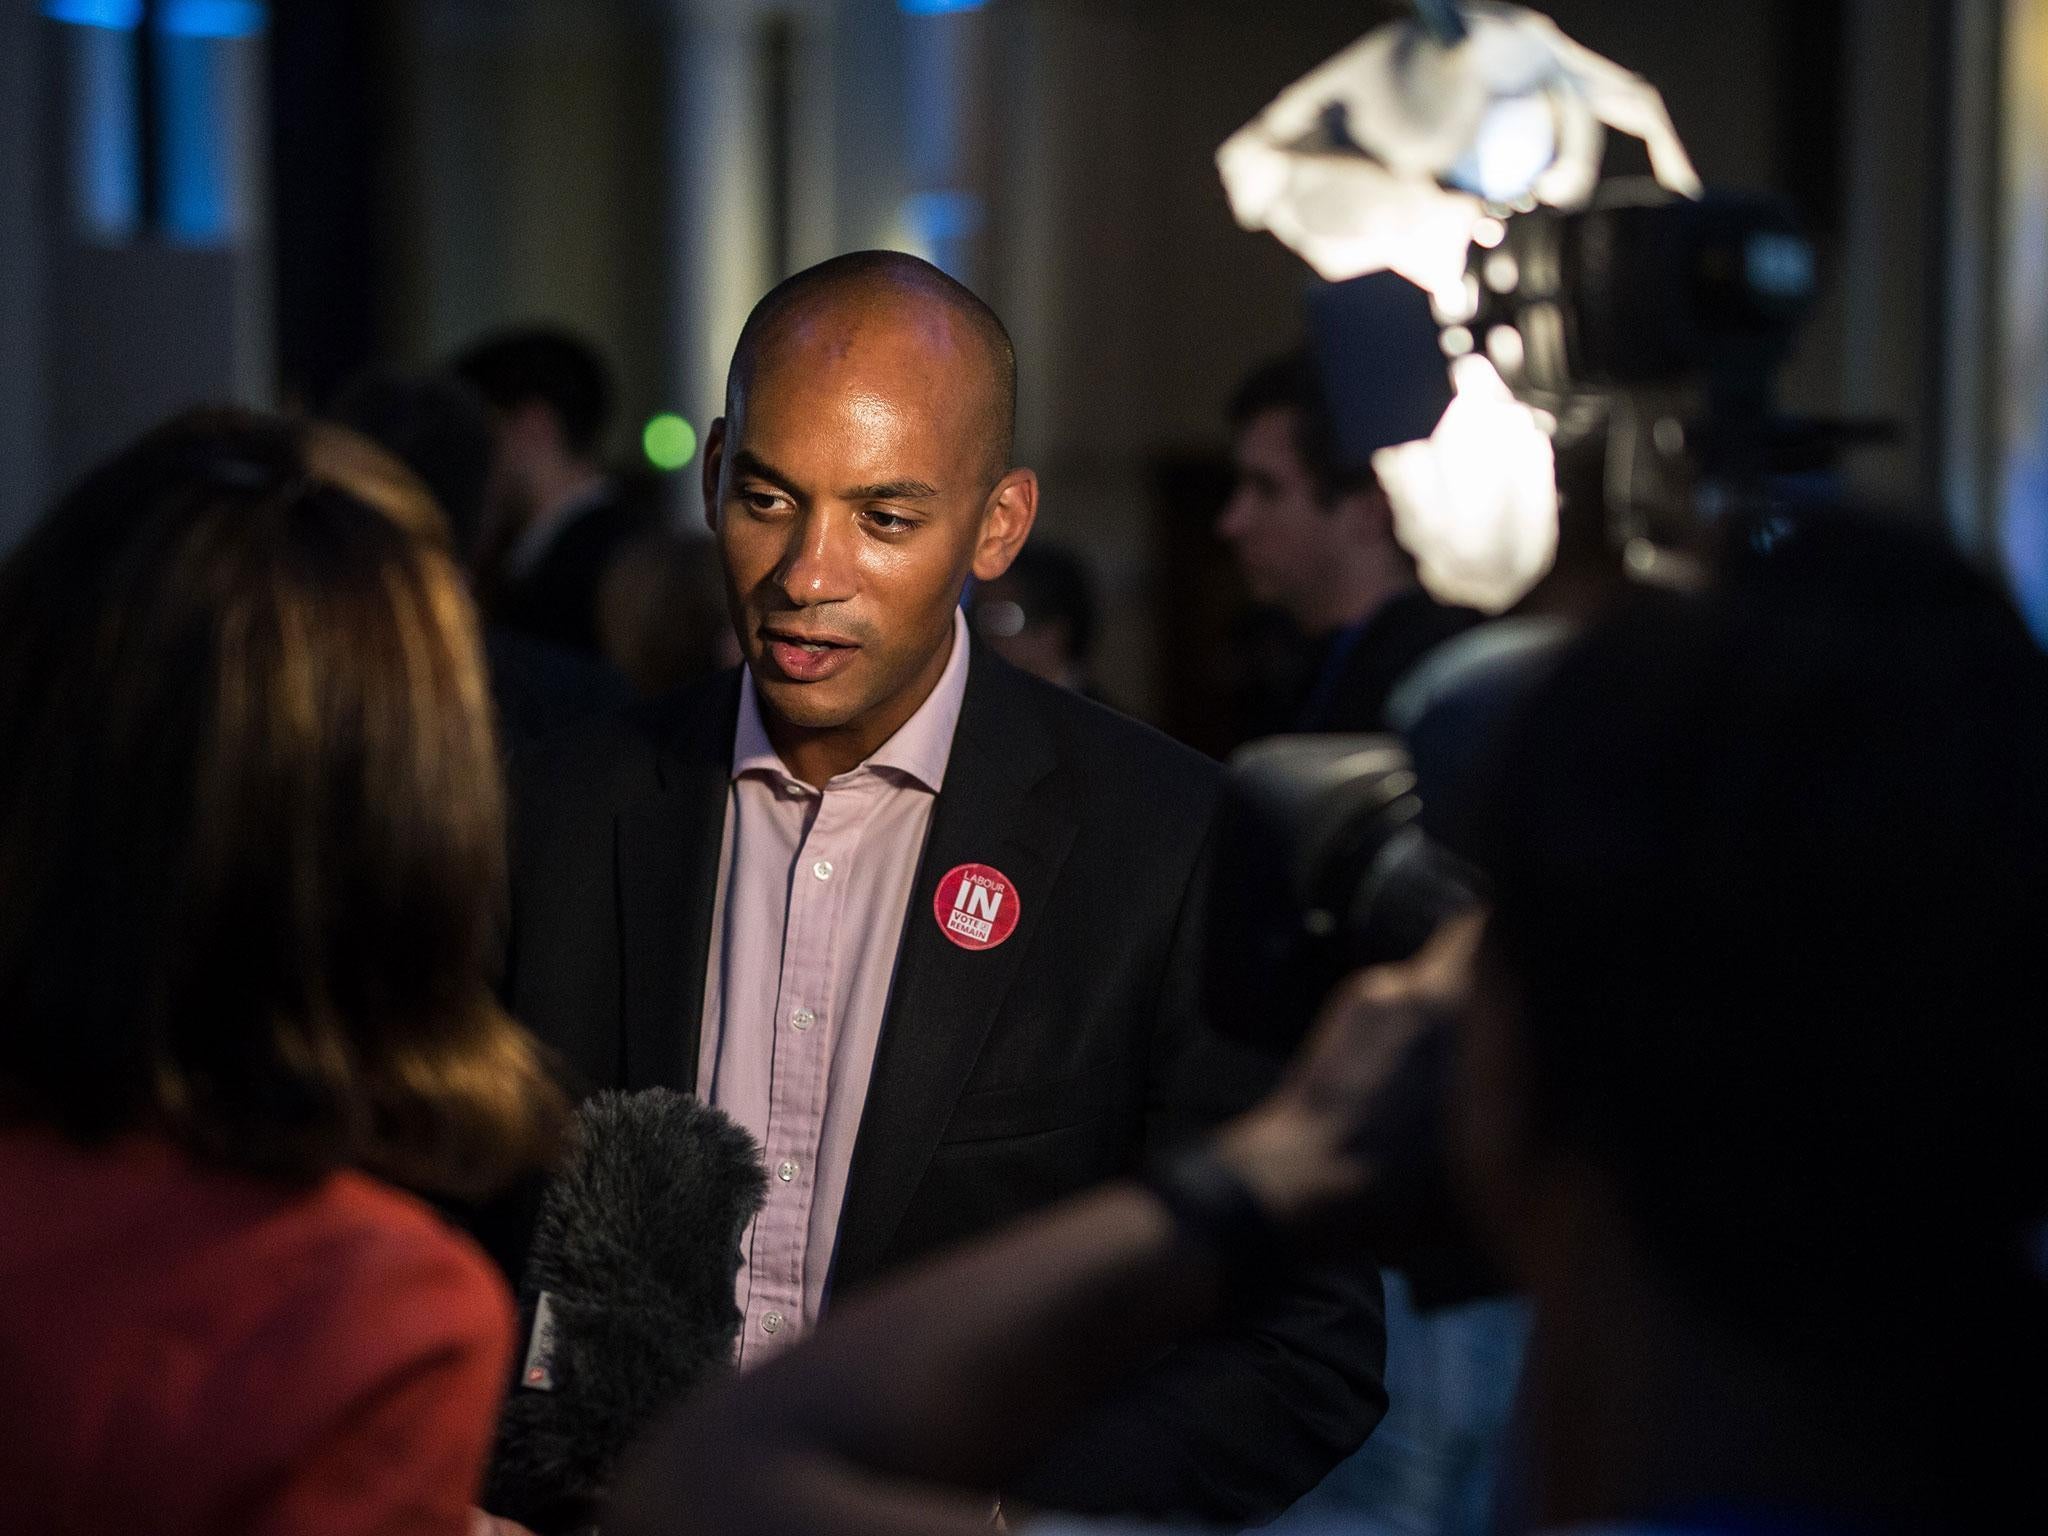 Chuka Umunna was one of Labour's leading Remain campaigners